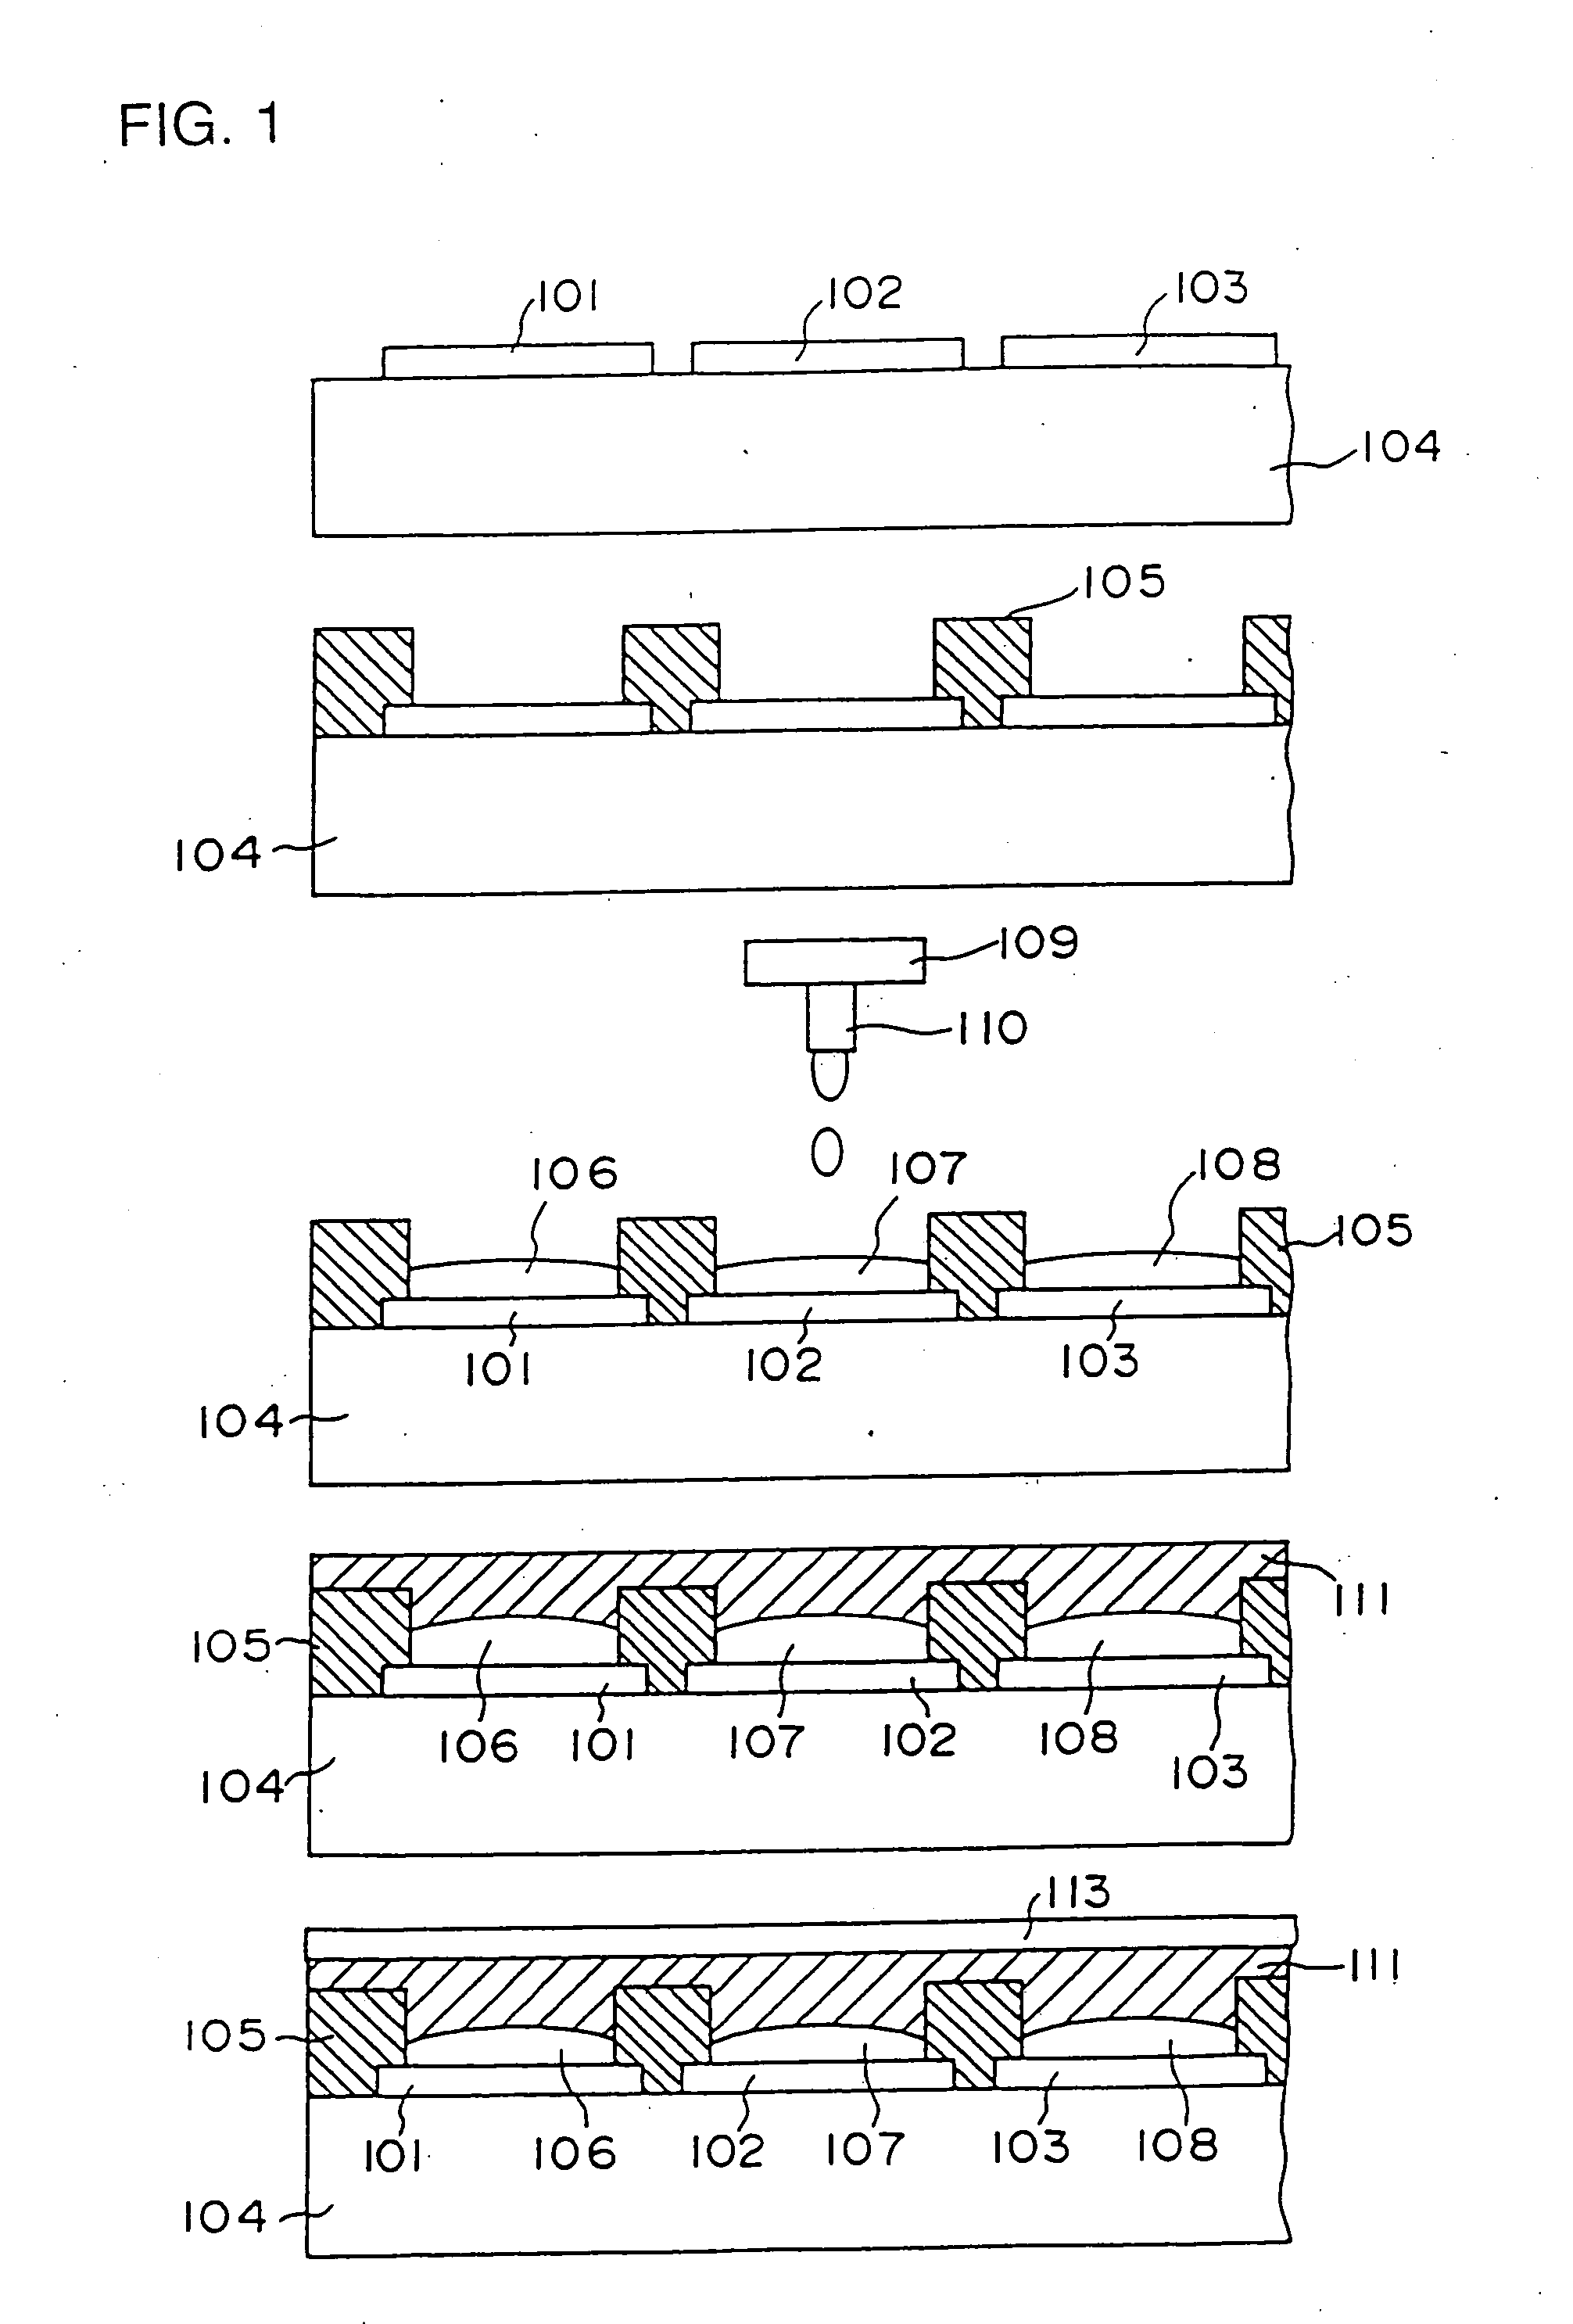 Composition for an organic el element and method of manufacturing the organic EL element